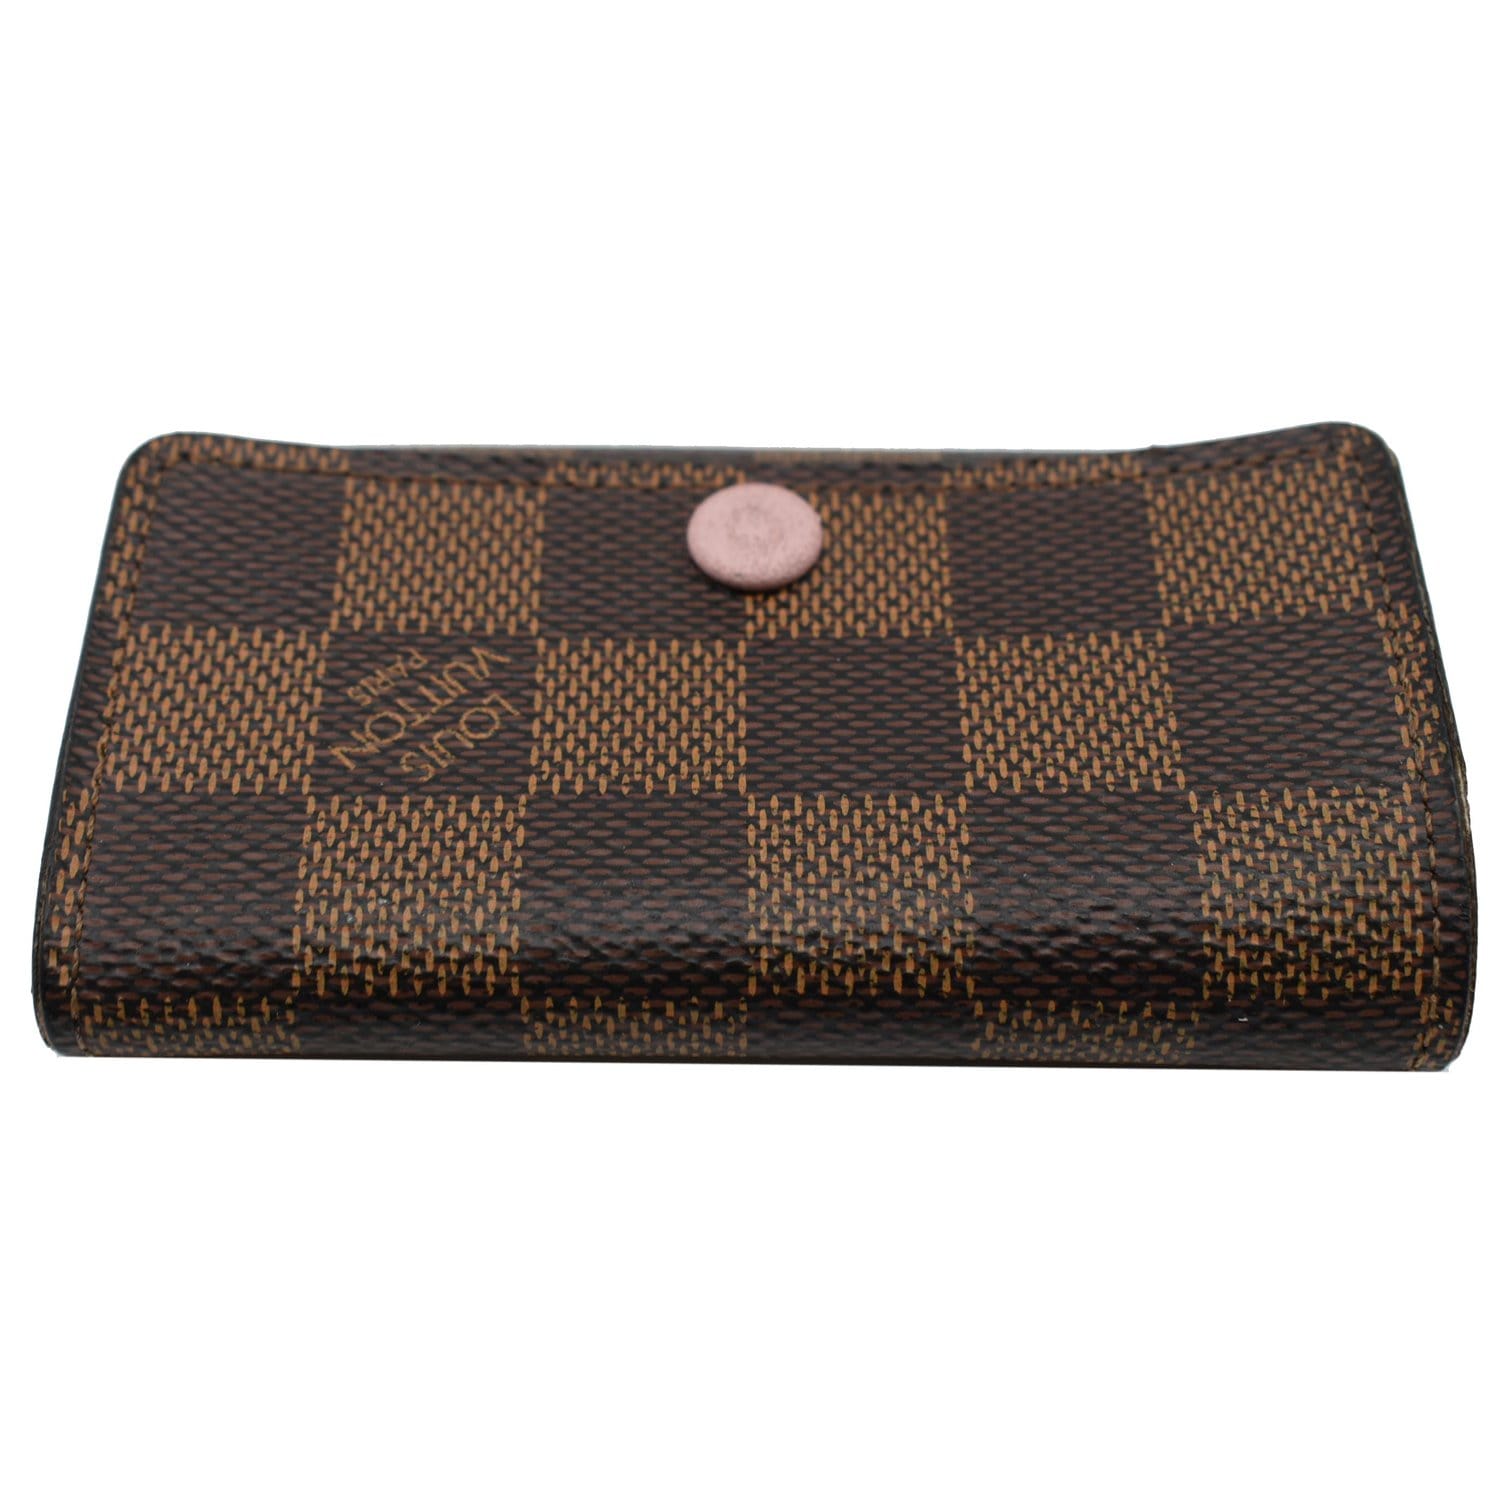 Louis Vuitton Damier Ebene Multicles 6 Key Holder at Jill's Consignment